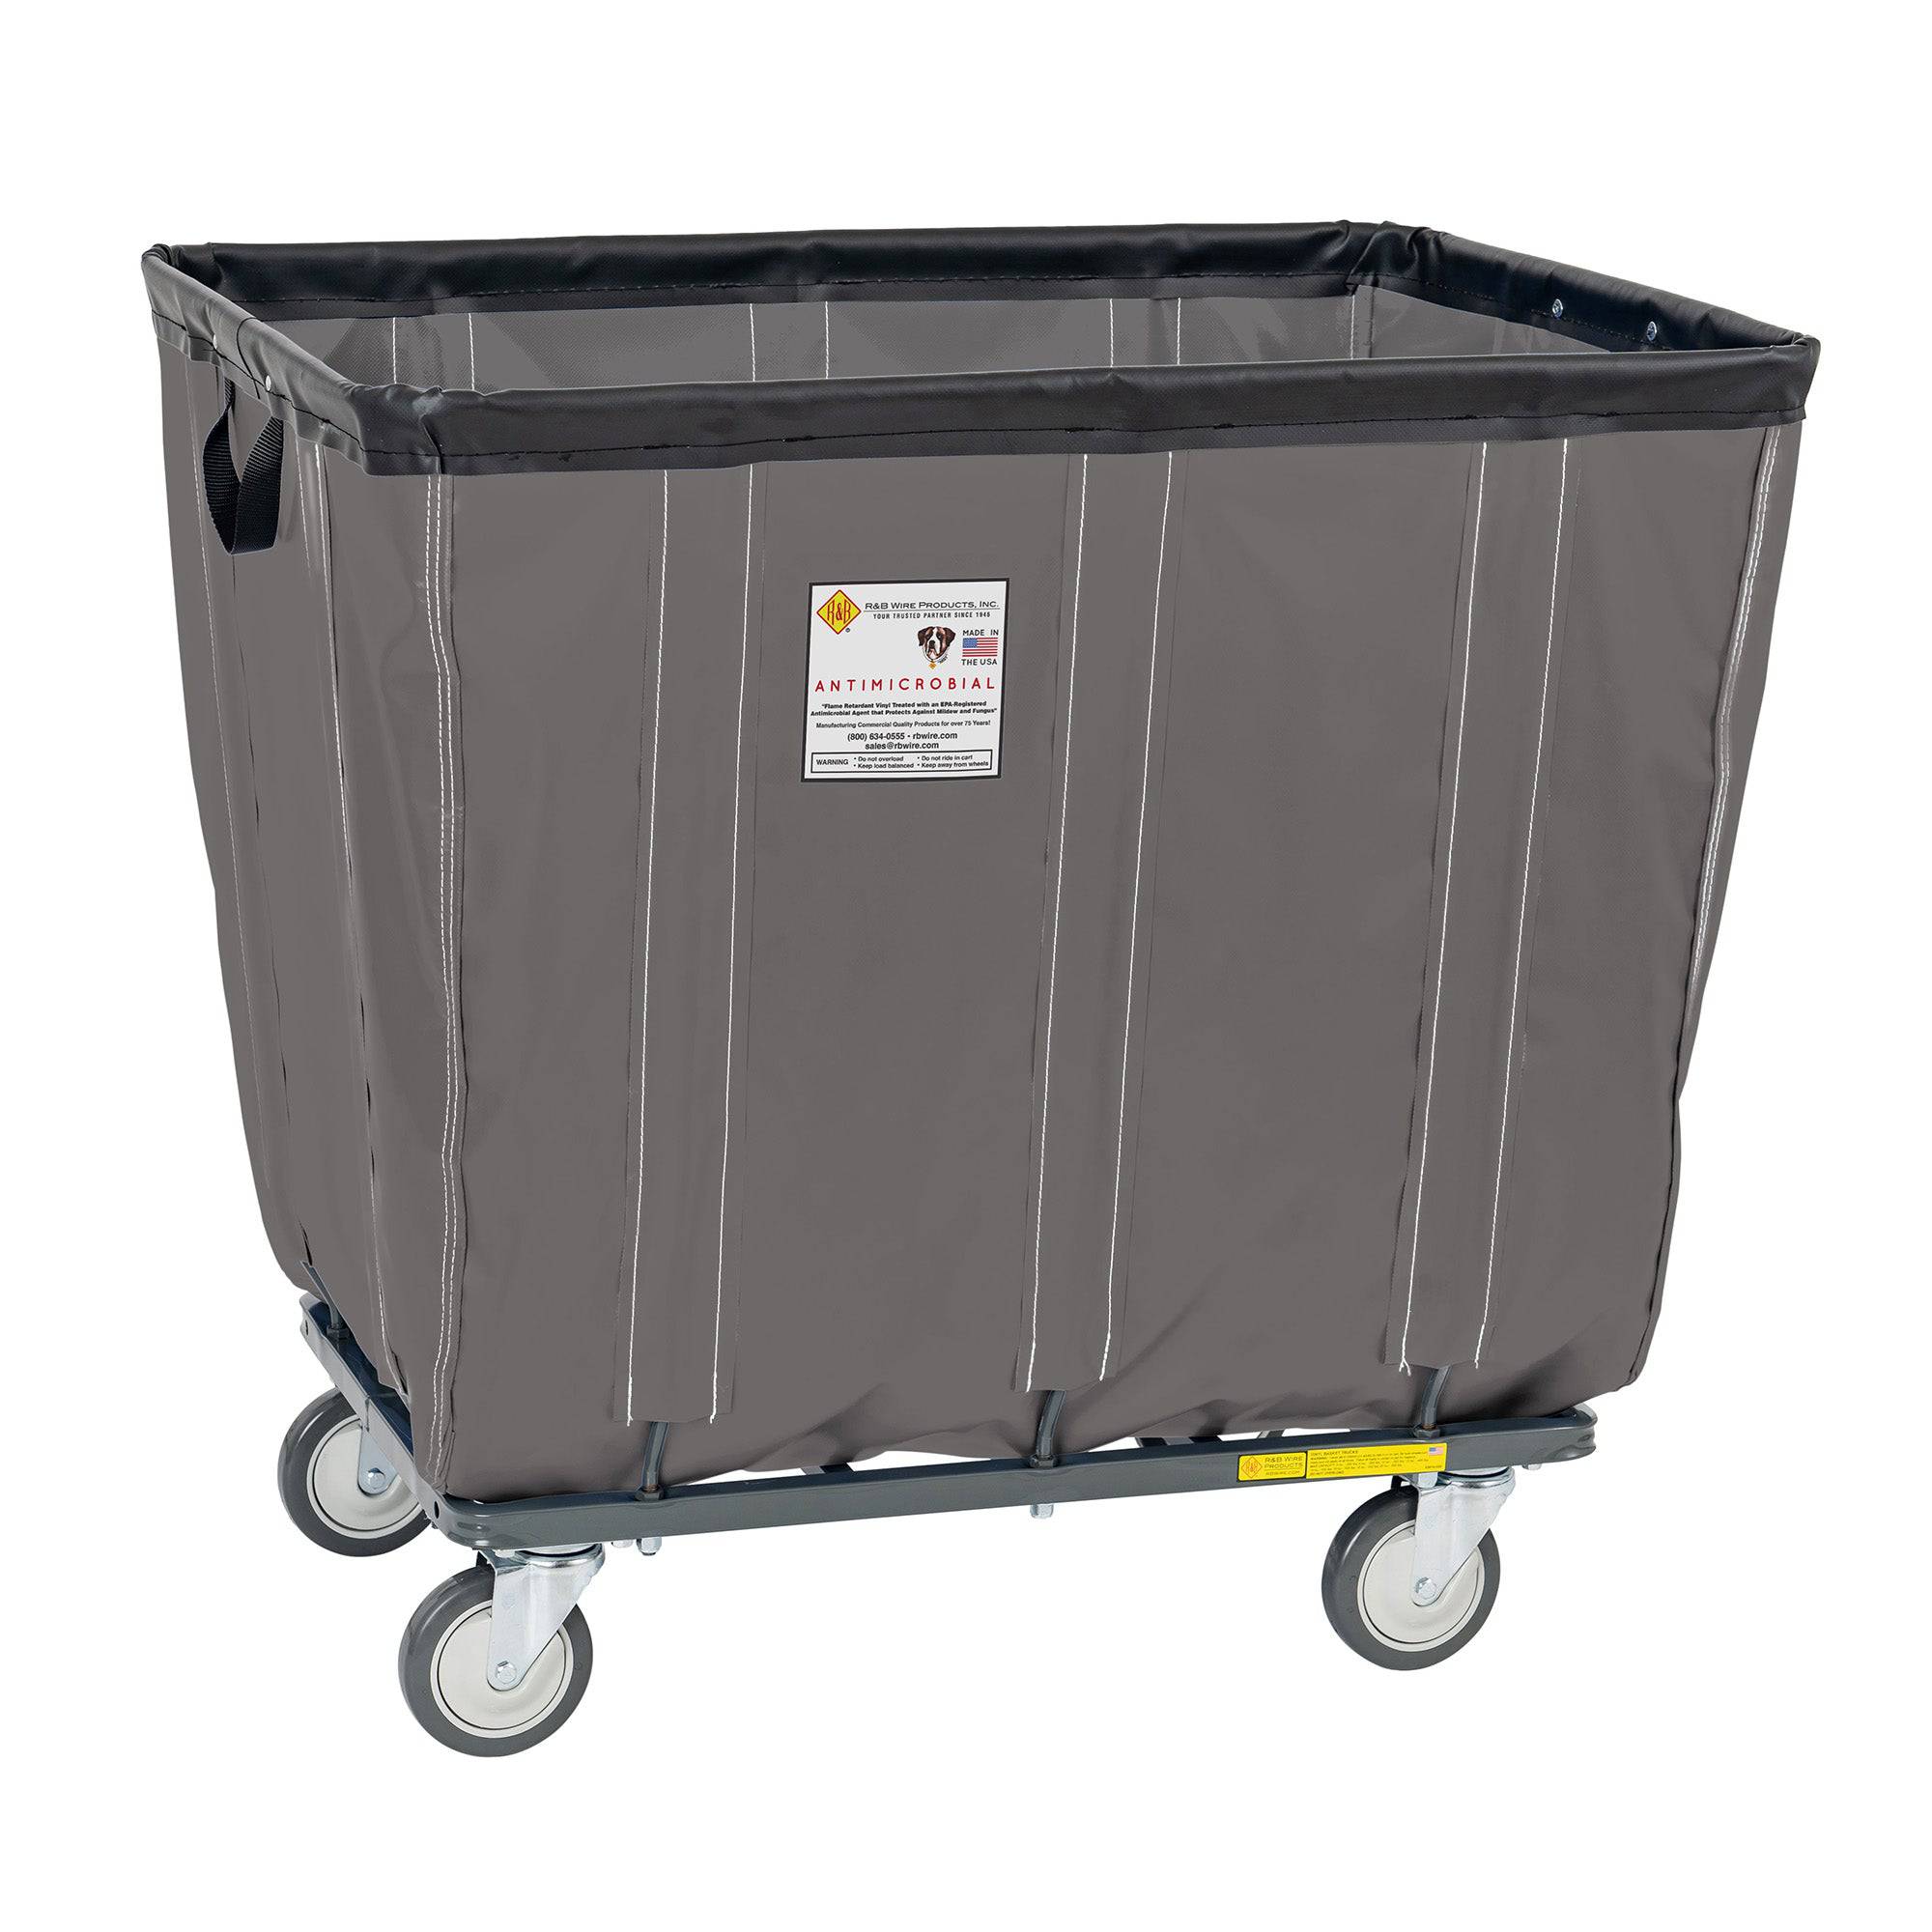 Vinyl Basket Truck with Antimicrobial Liner - 20 Bushel - Knocked Down - R&B Wire